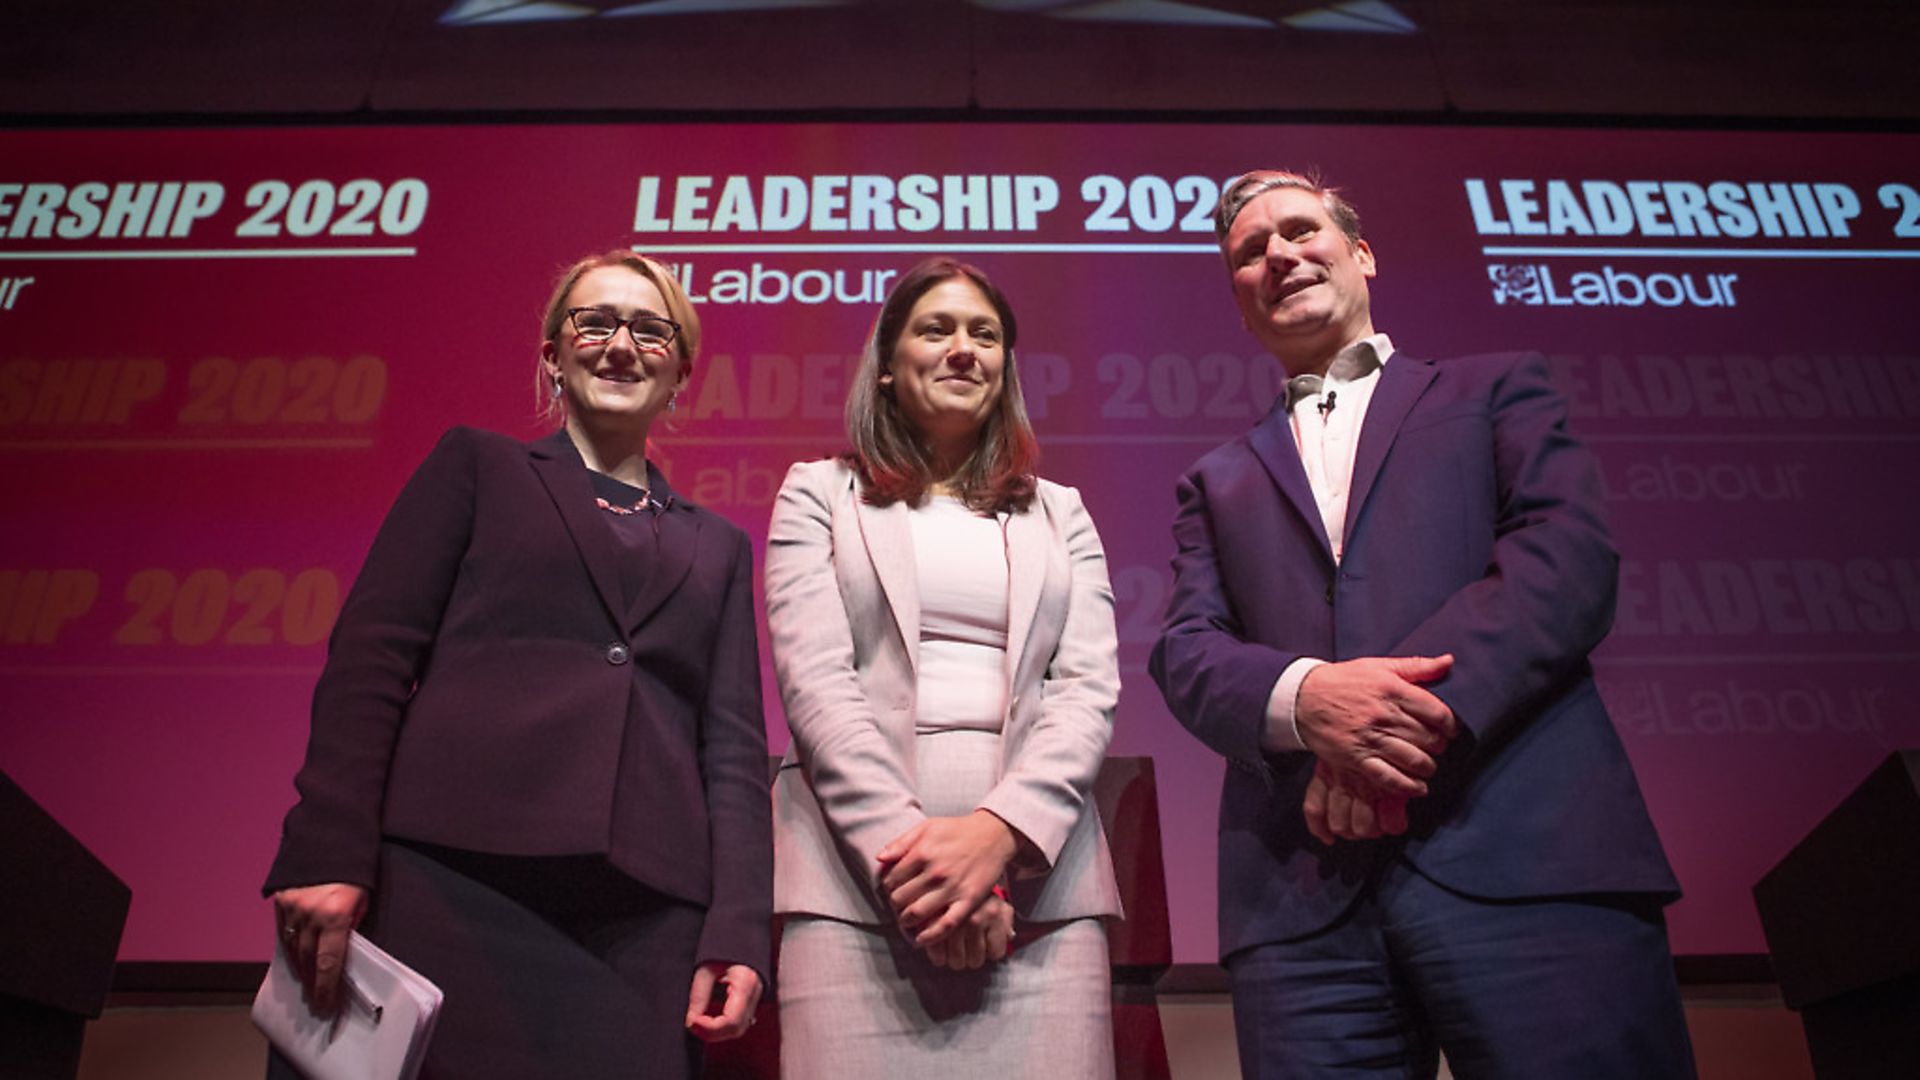 (left to right) Labour leadership candidates Rebecca Long-Bailey, Lisa Nandy and Sir Keir Starmer. Photograph: Jane Barlow/PA. - Credit: PA